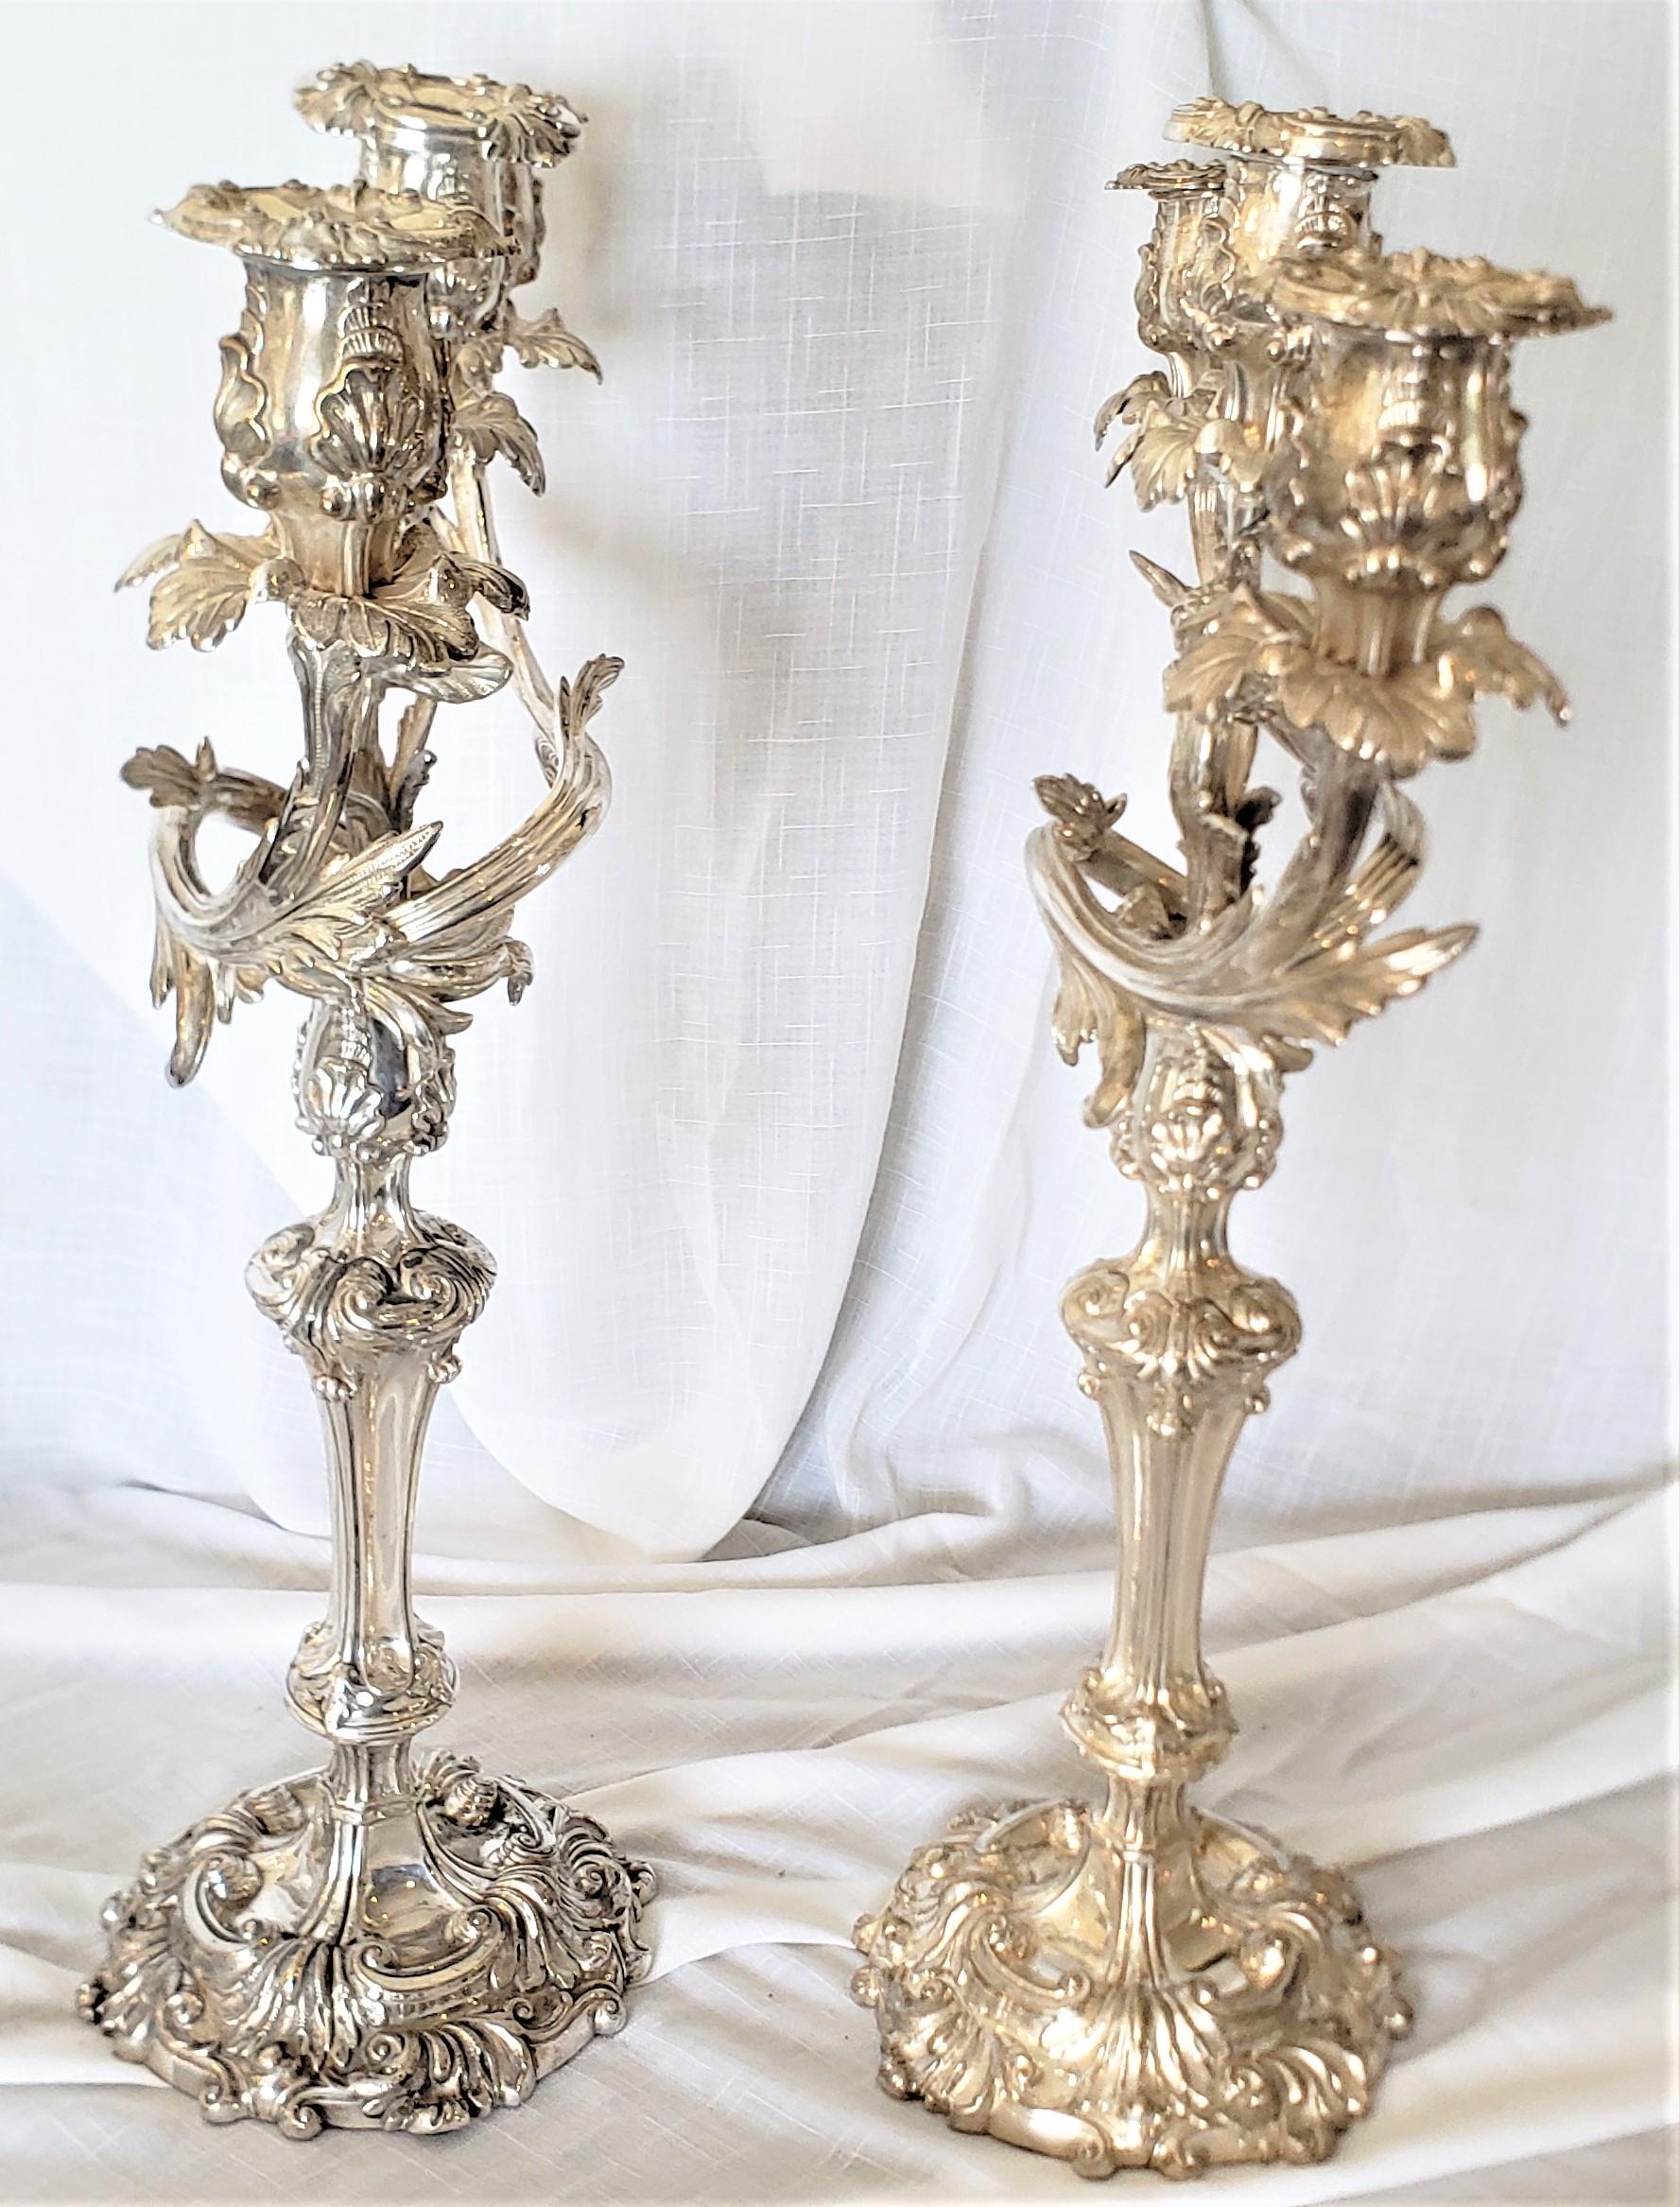 English Pair of Antique Sheffield Plate Convertible 3 Branch Candlesticks or Candelabra For Sale